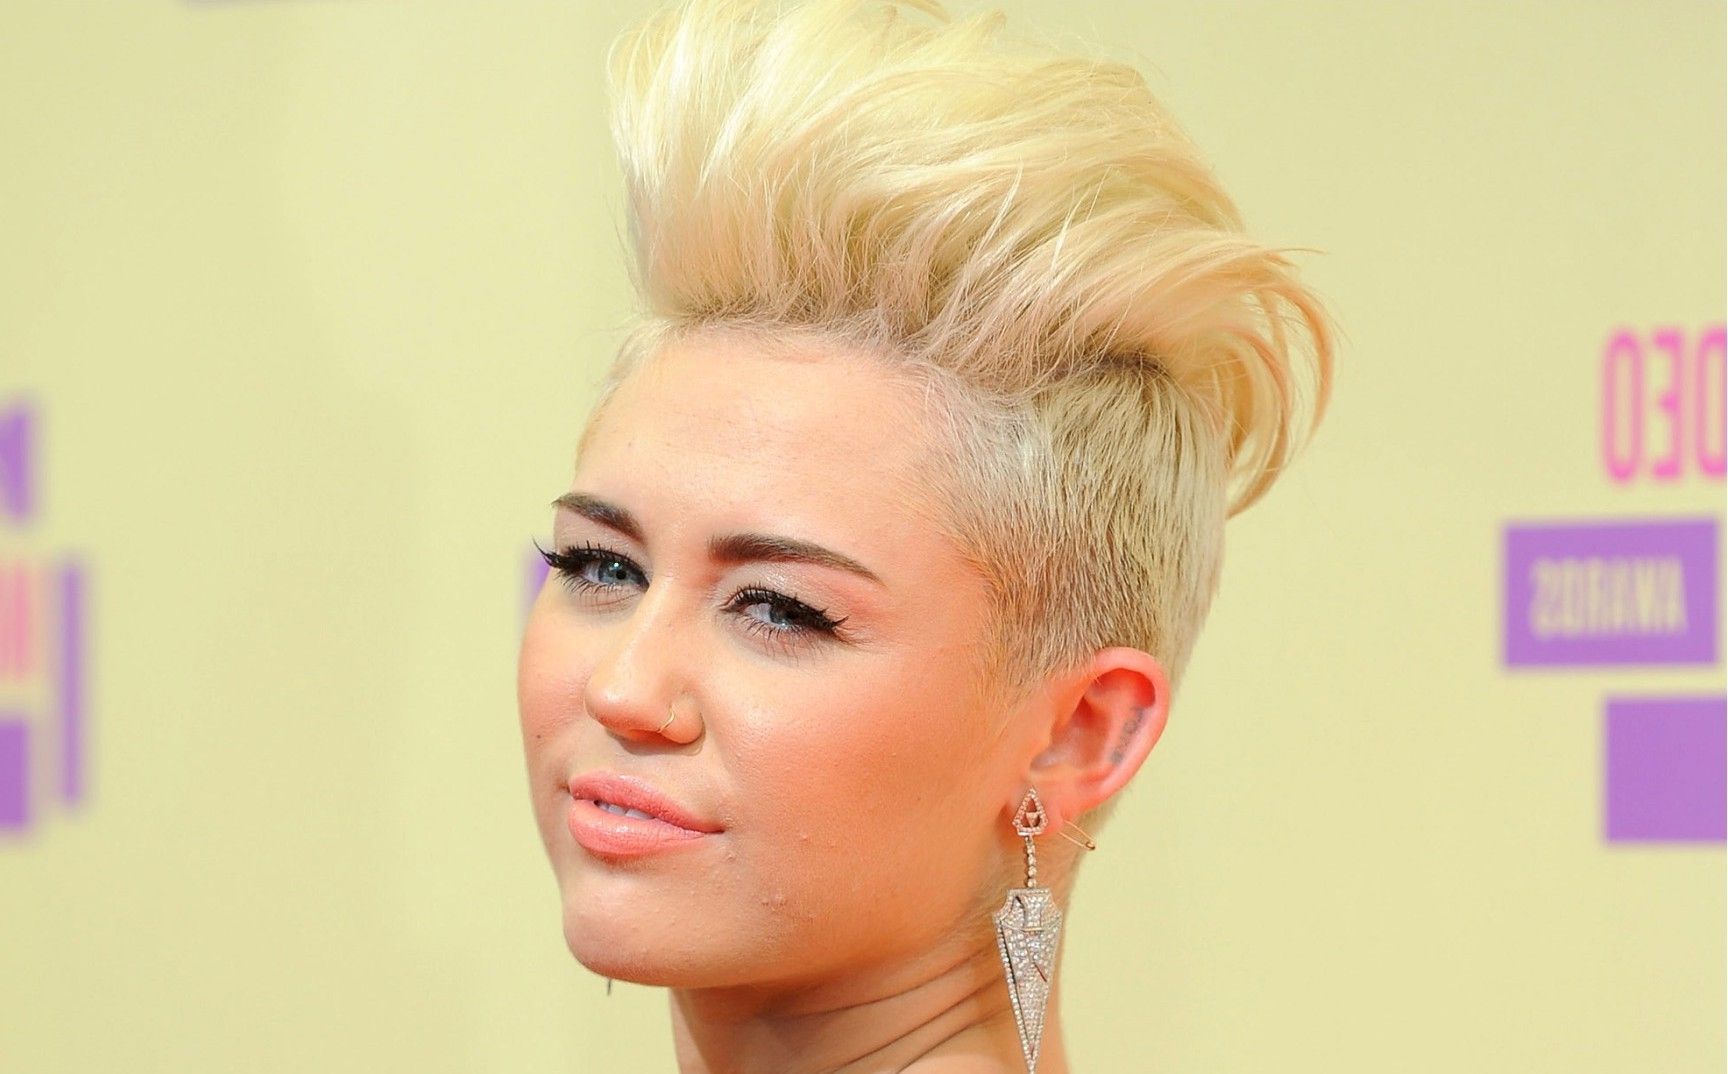 Miley Cyrus Short Hairstyle 01 – Hairstyles, Easy Hairstyles For Girls Pertaining To Most Up To Date Miley Cyrus Pixie Hairstyles (View 7 of 15)